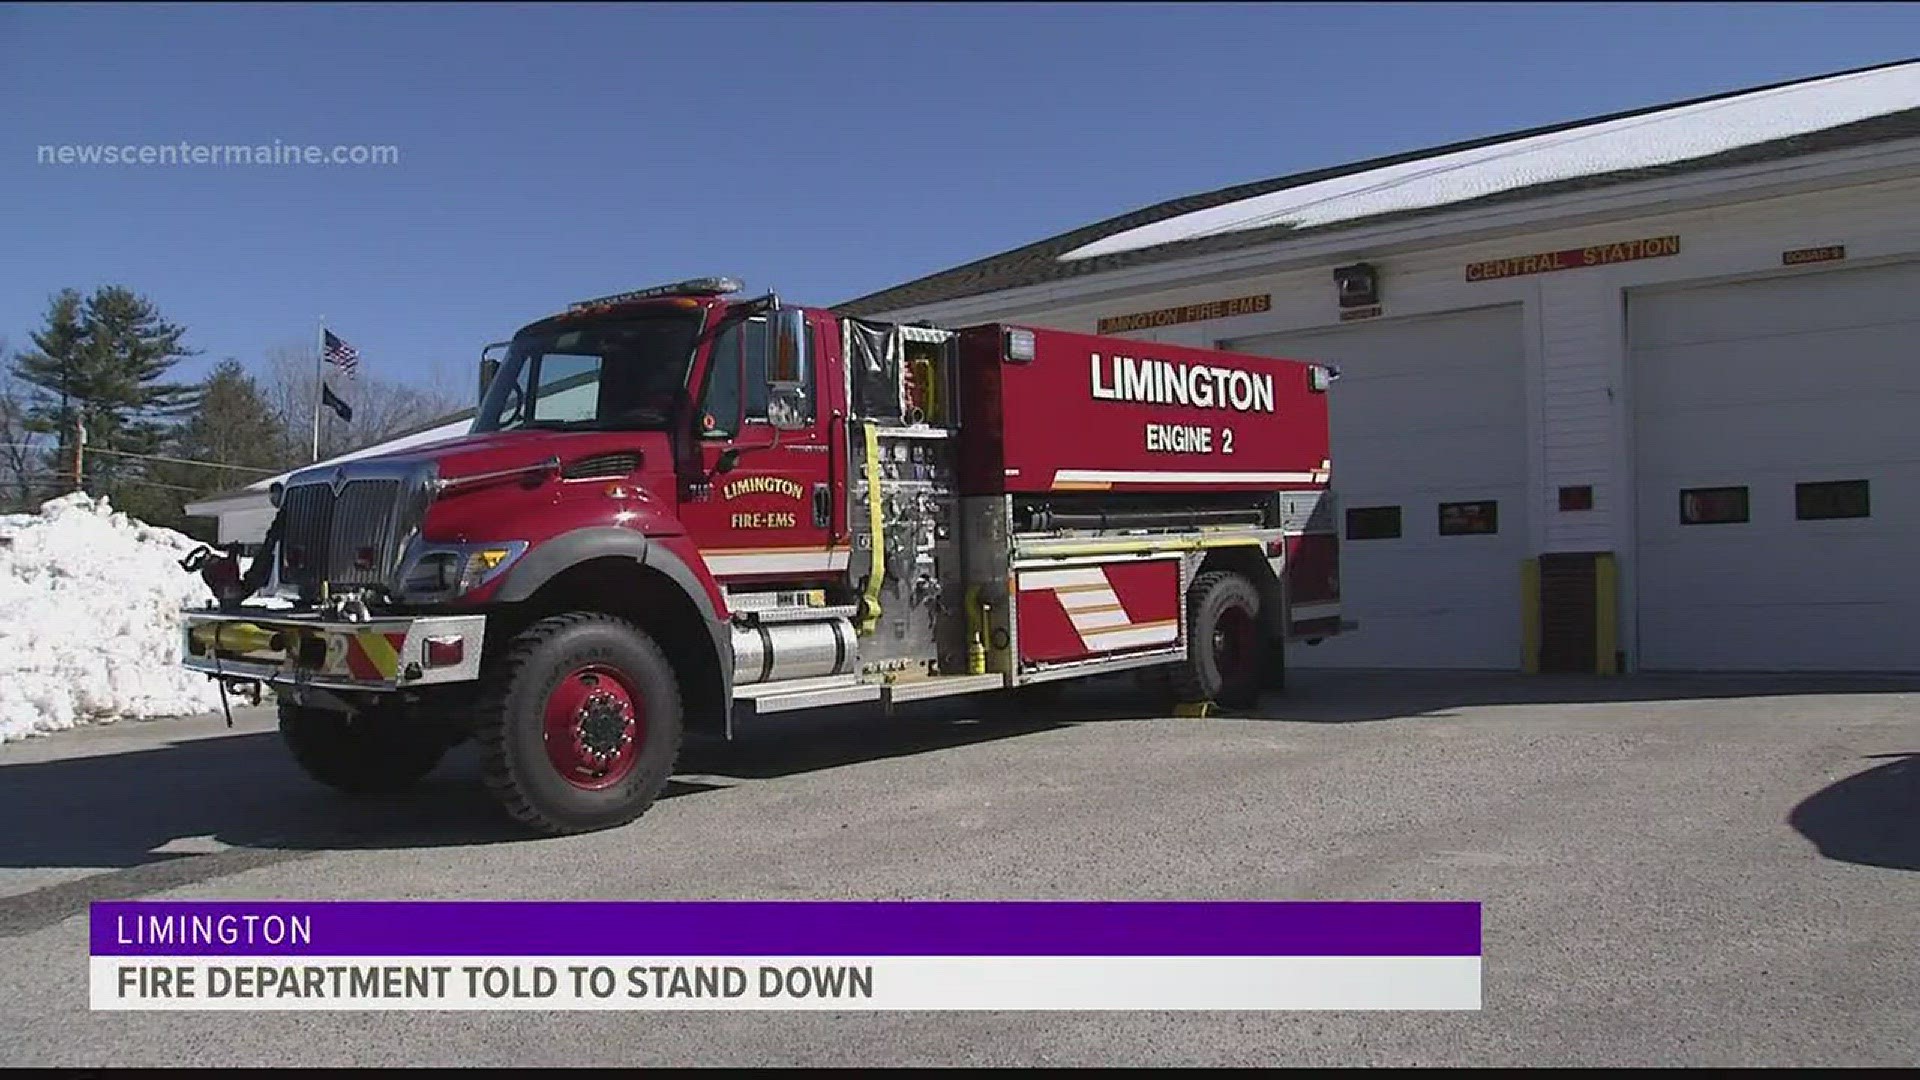 Fire department told to stand down